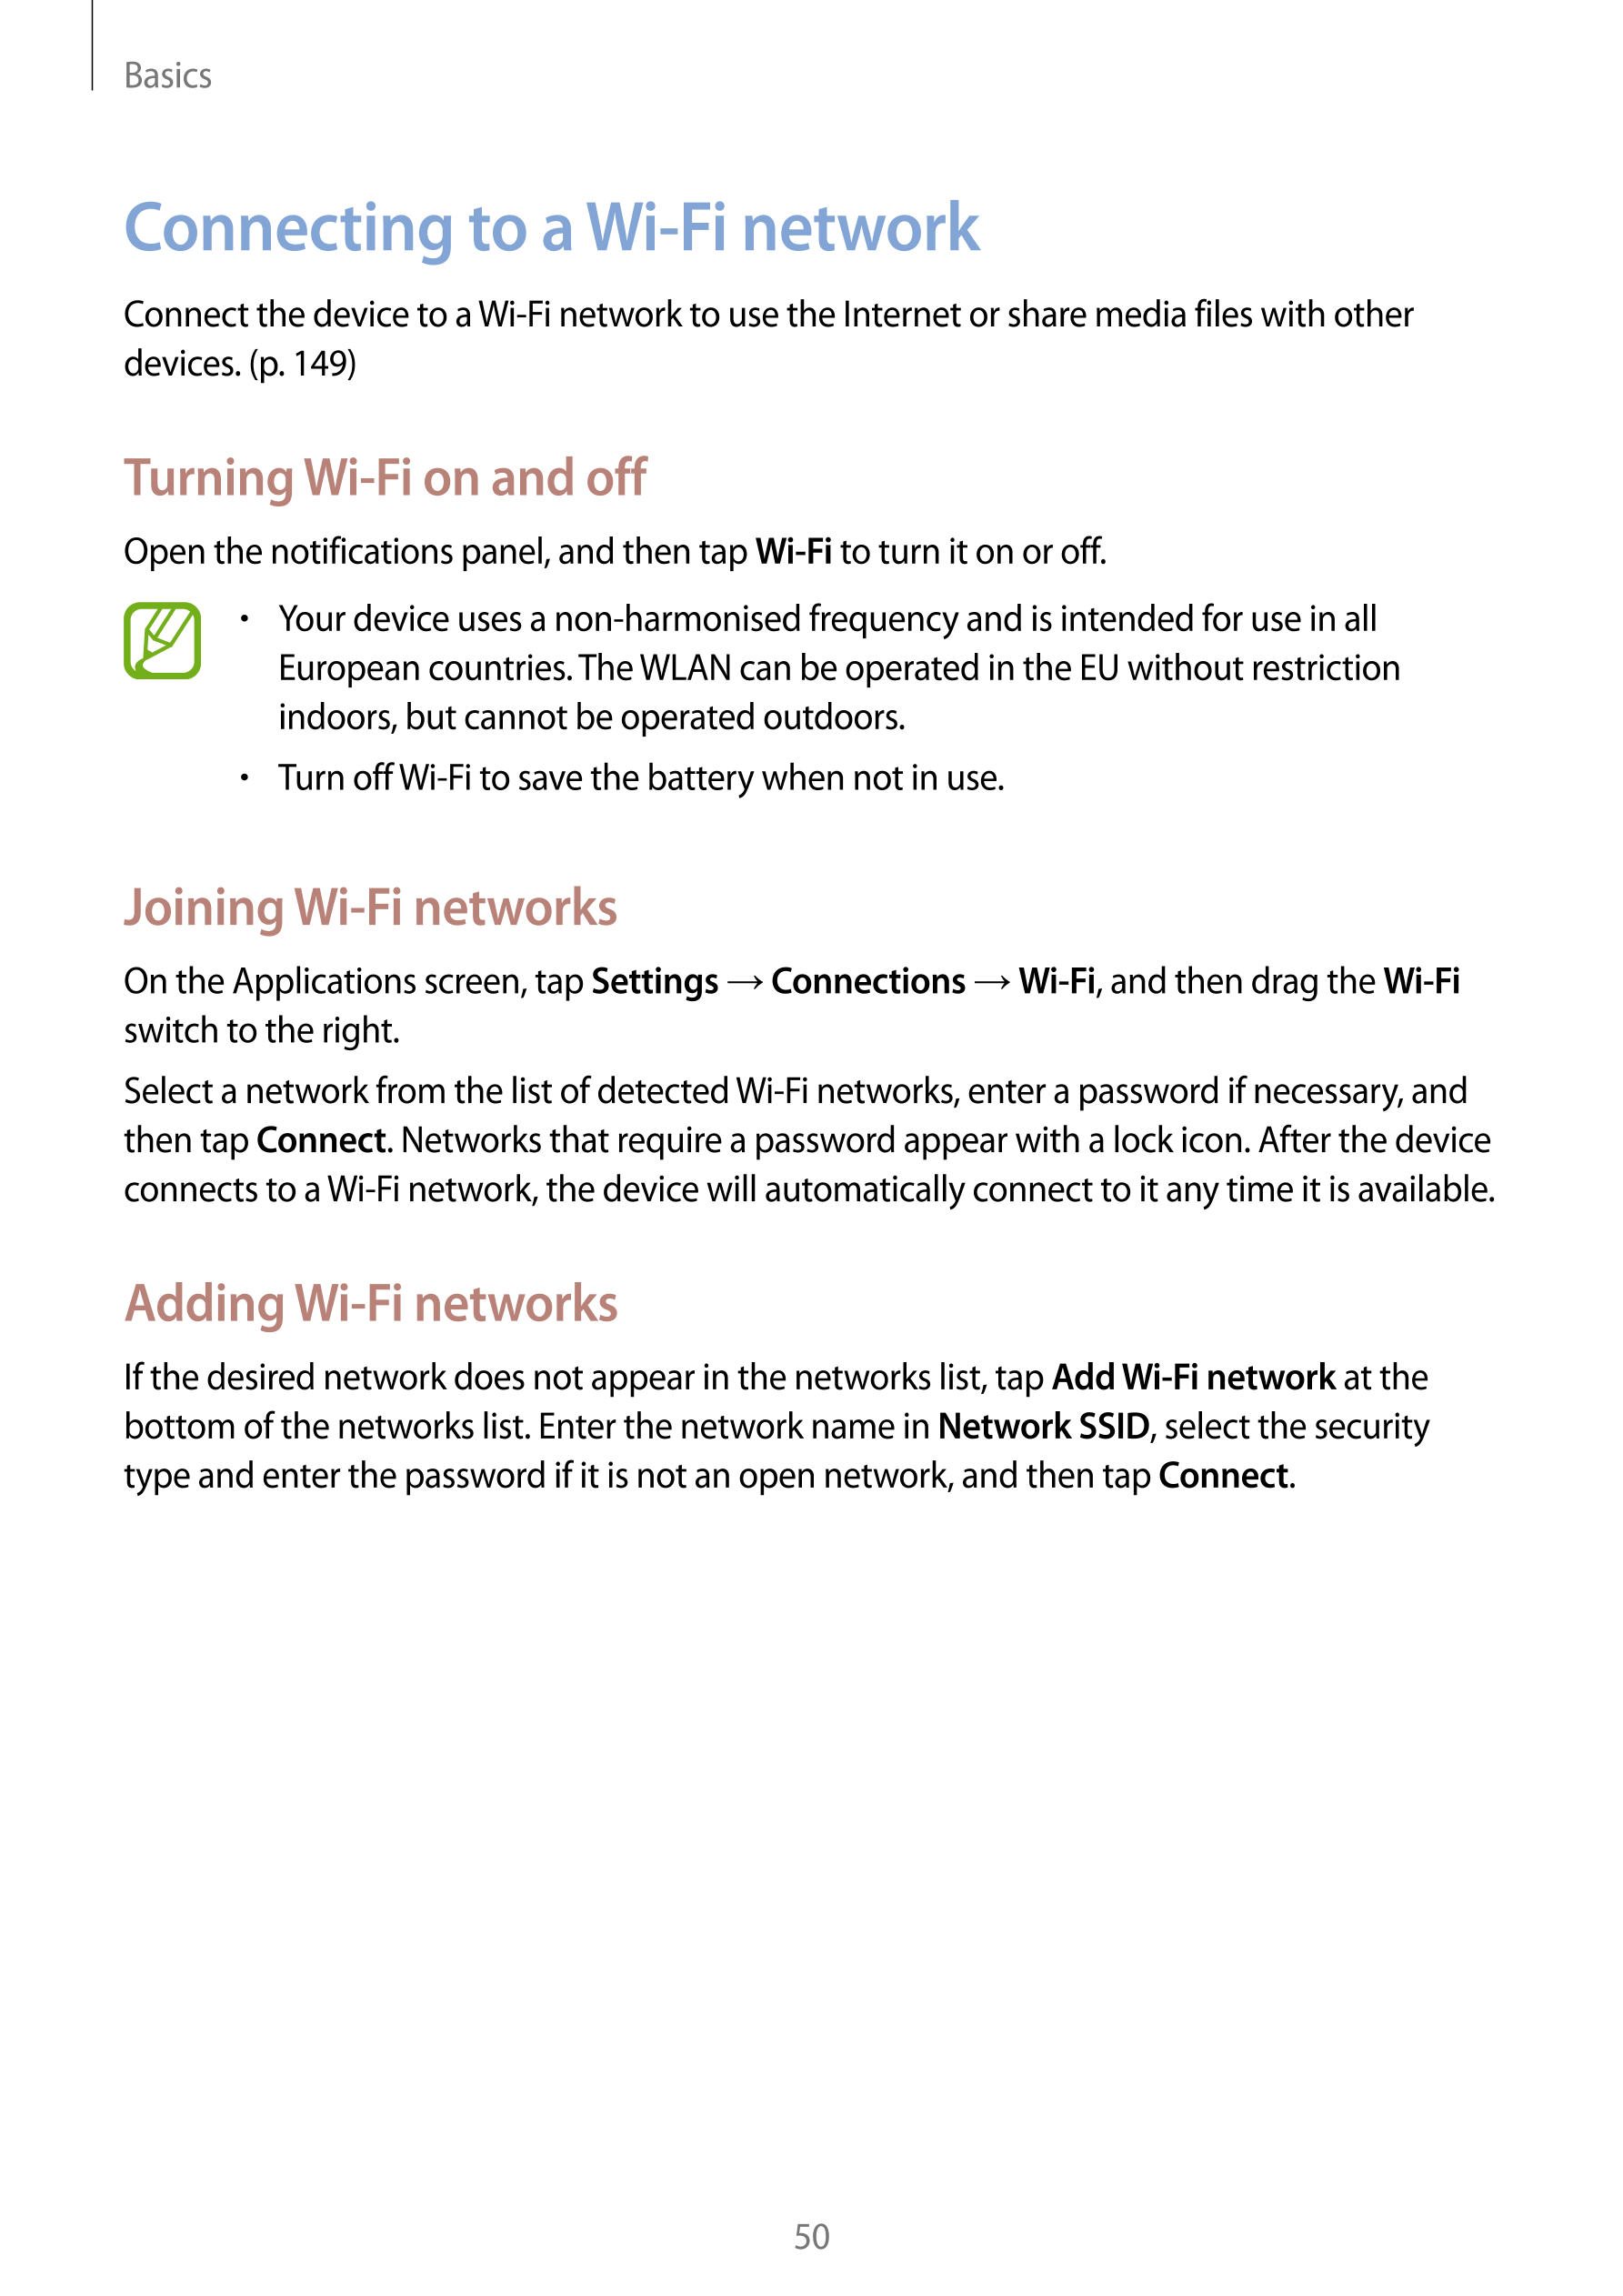 Basics
Connecting to a Wi-Fi network
Connect the device to a Wi-Fi network to use the Internet or share media files with other 
